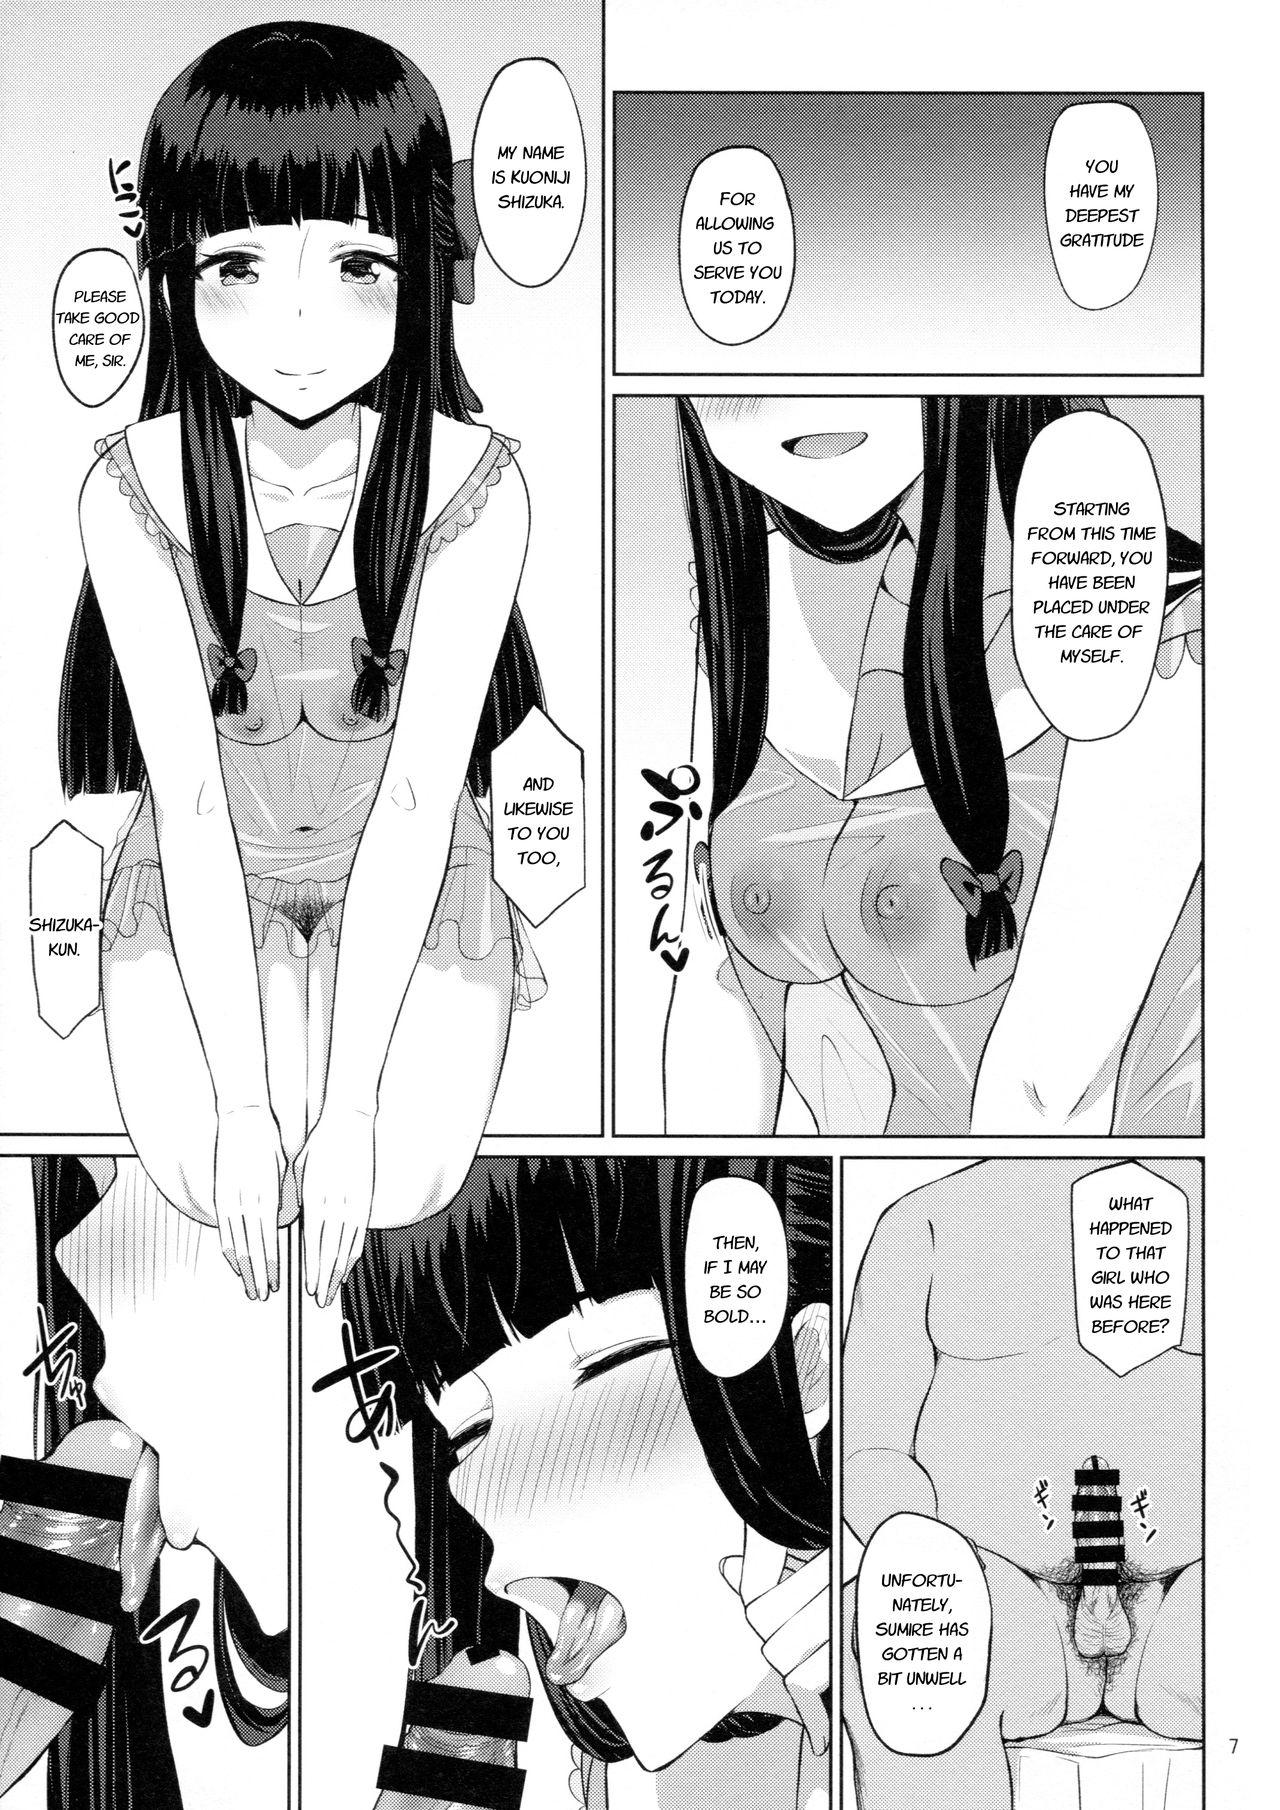 Asian D.EMOTION - Tokyo 7th sisters Weird - Page 6